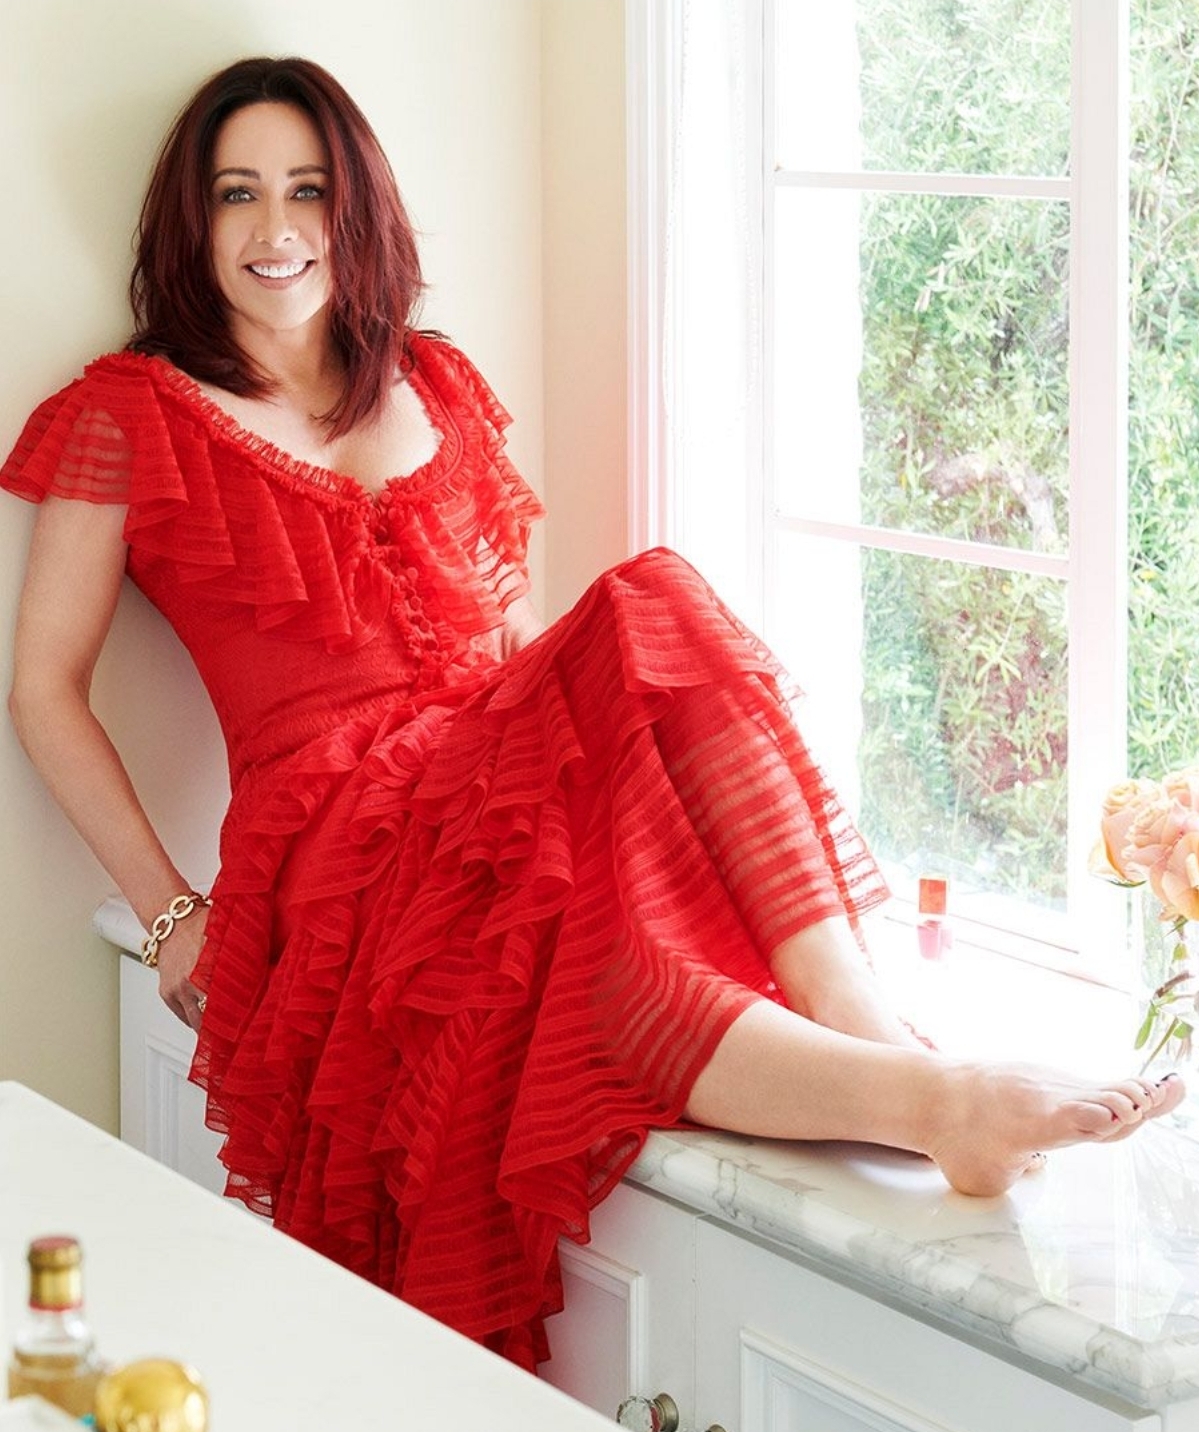 People who liked Patricia Heaton's feet, also liked.